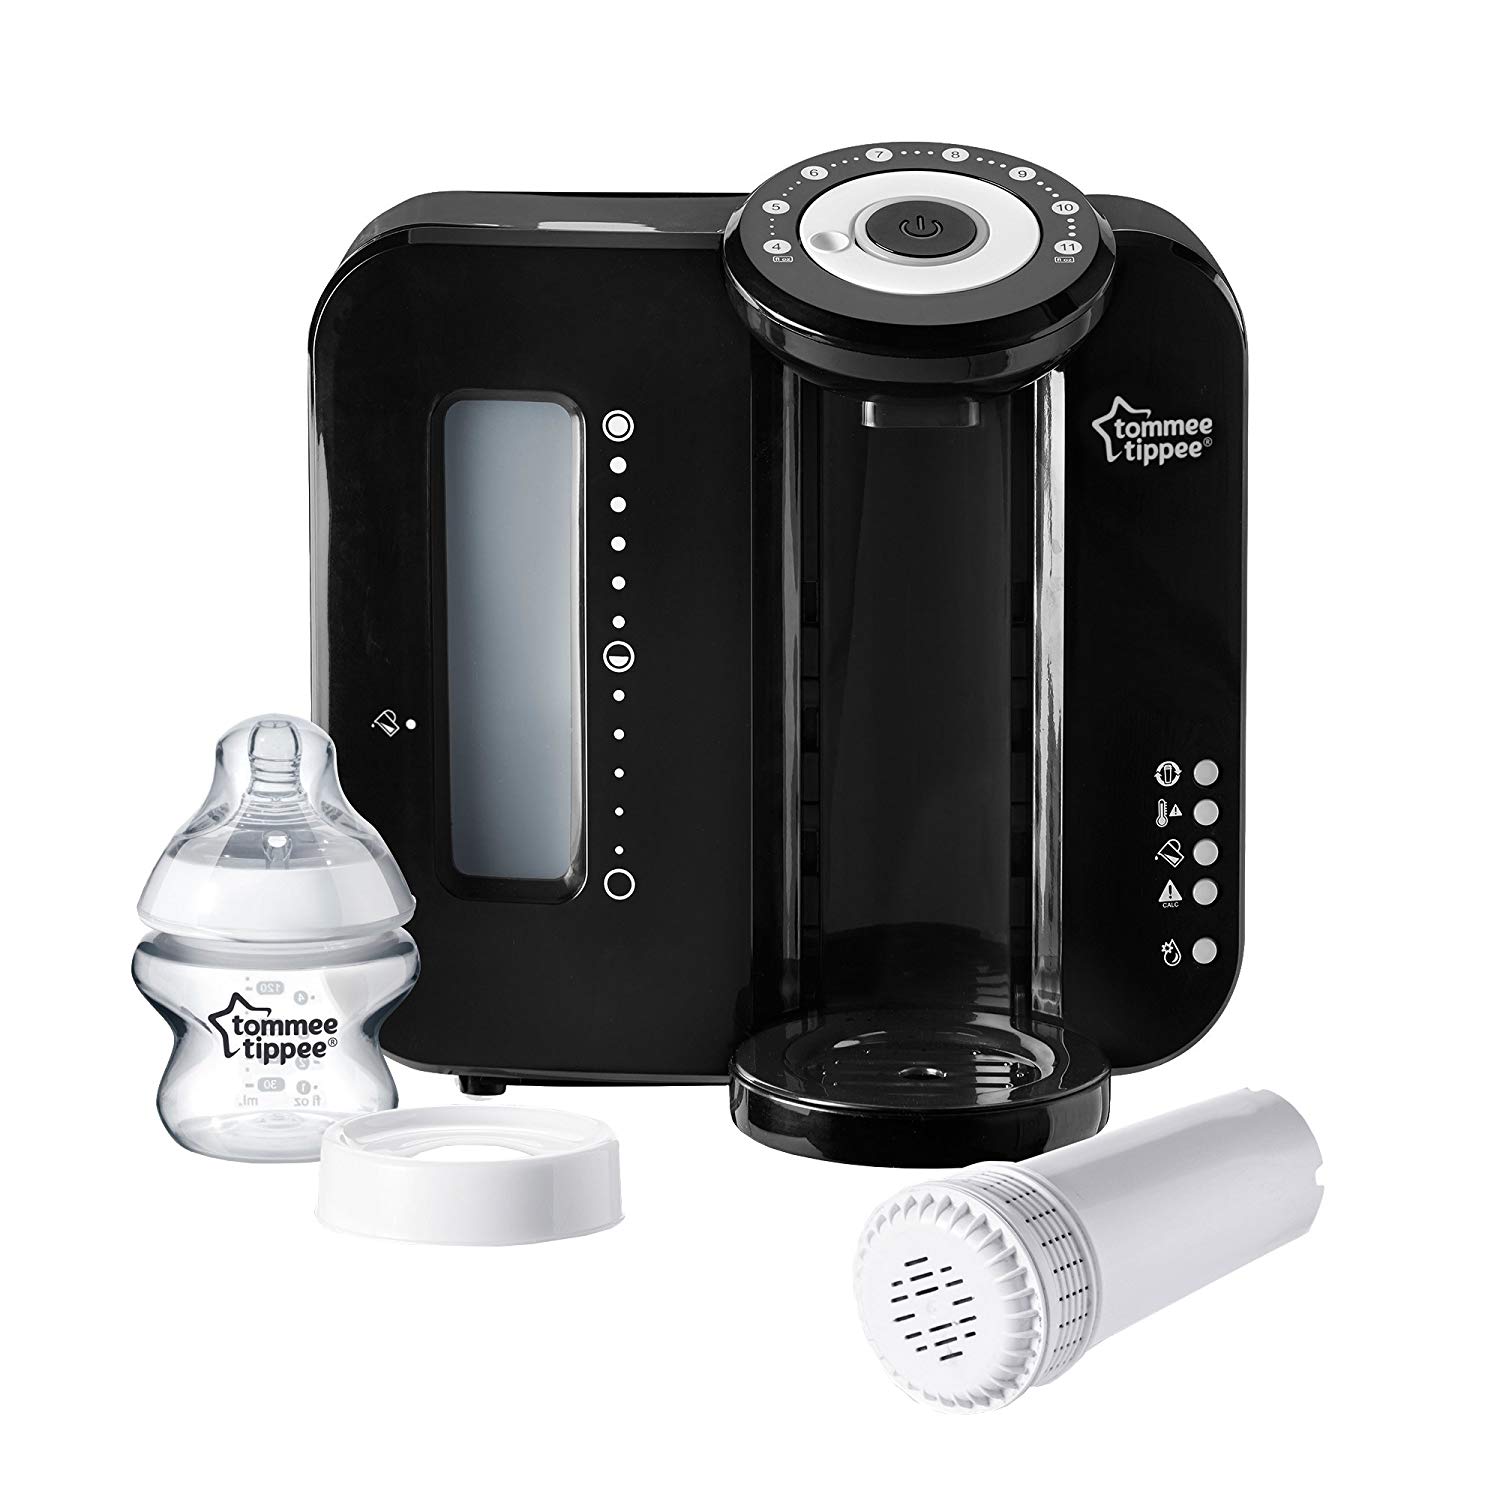 Tommee Tippee Perfect Prep Baby Bottle Maker, Built-in Filter System, Black